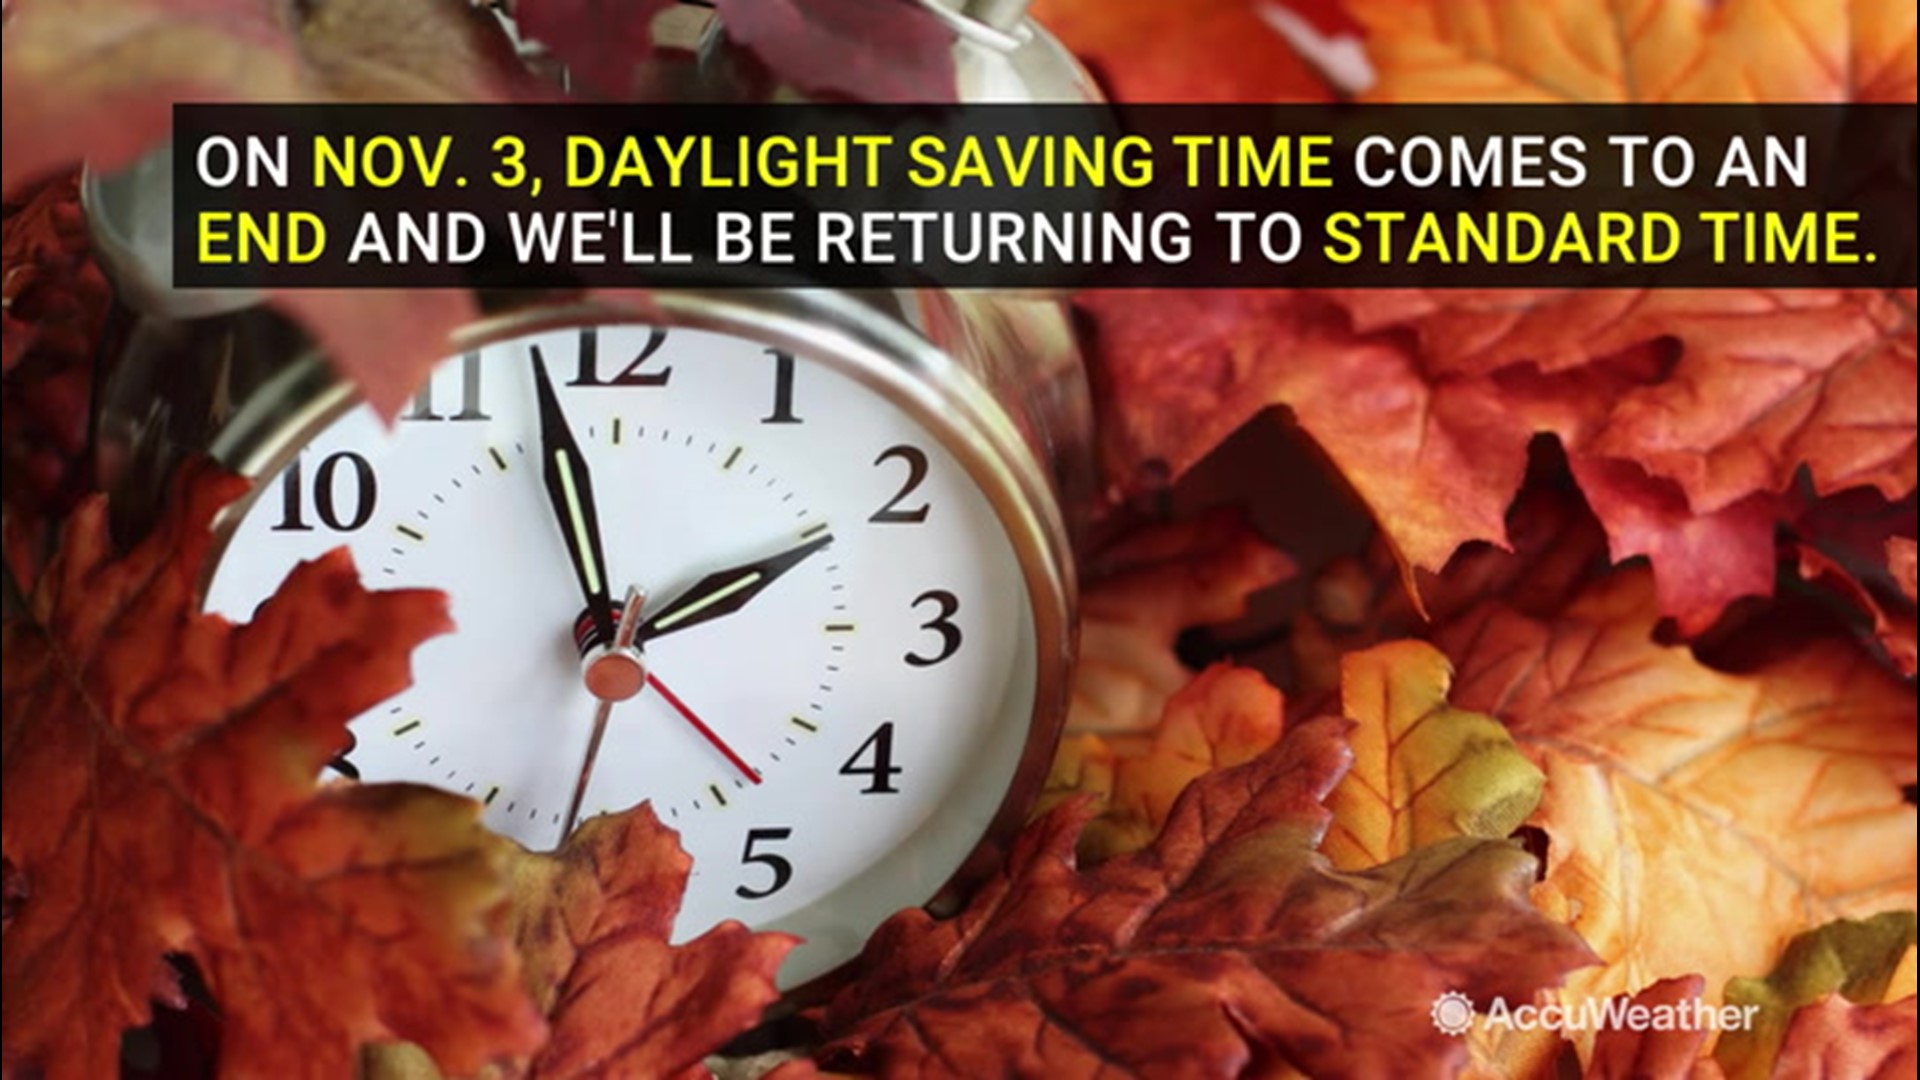 It's that time of year again. Fall back one hour on Nov. 3 as daylight saving time comes to an end and we return to standard time.